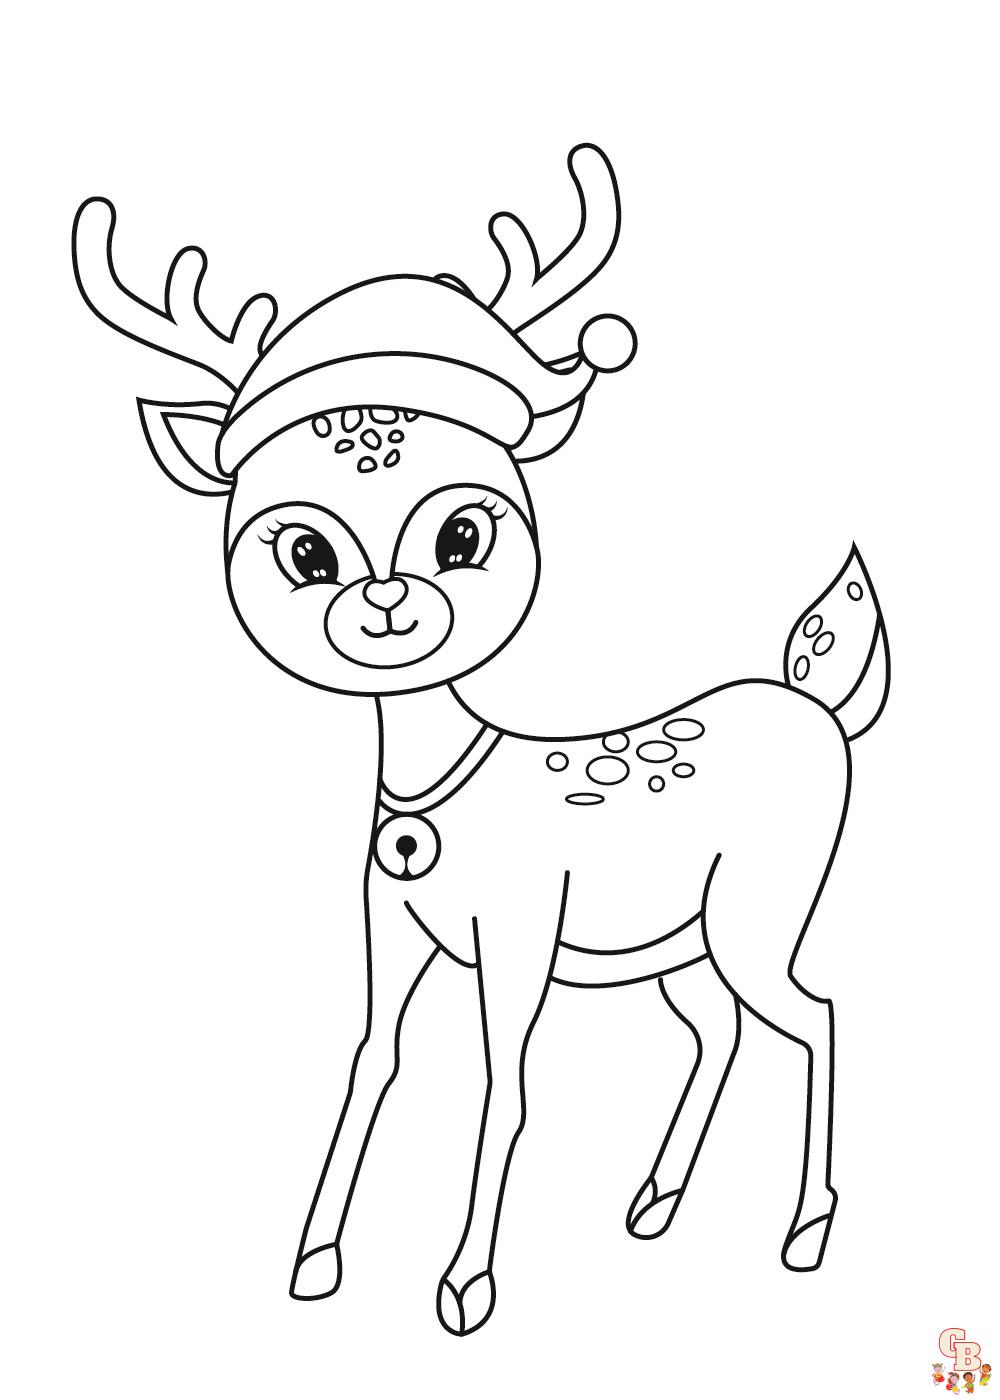 Cute reindeer coloring pages printable free and easy for kids